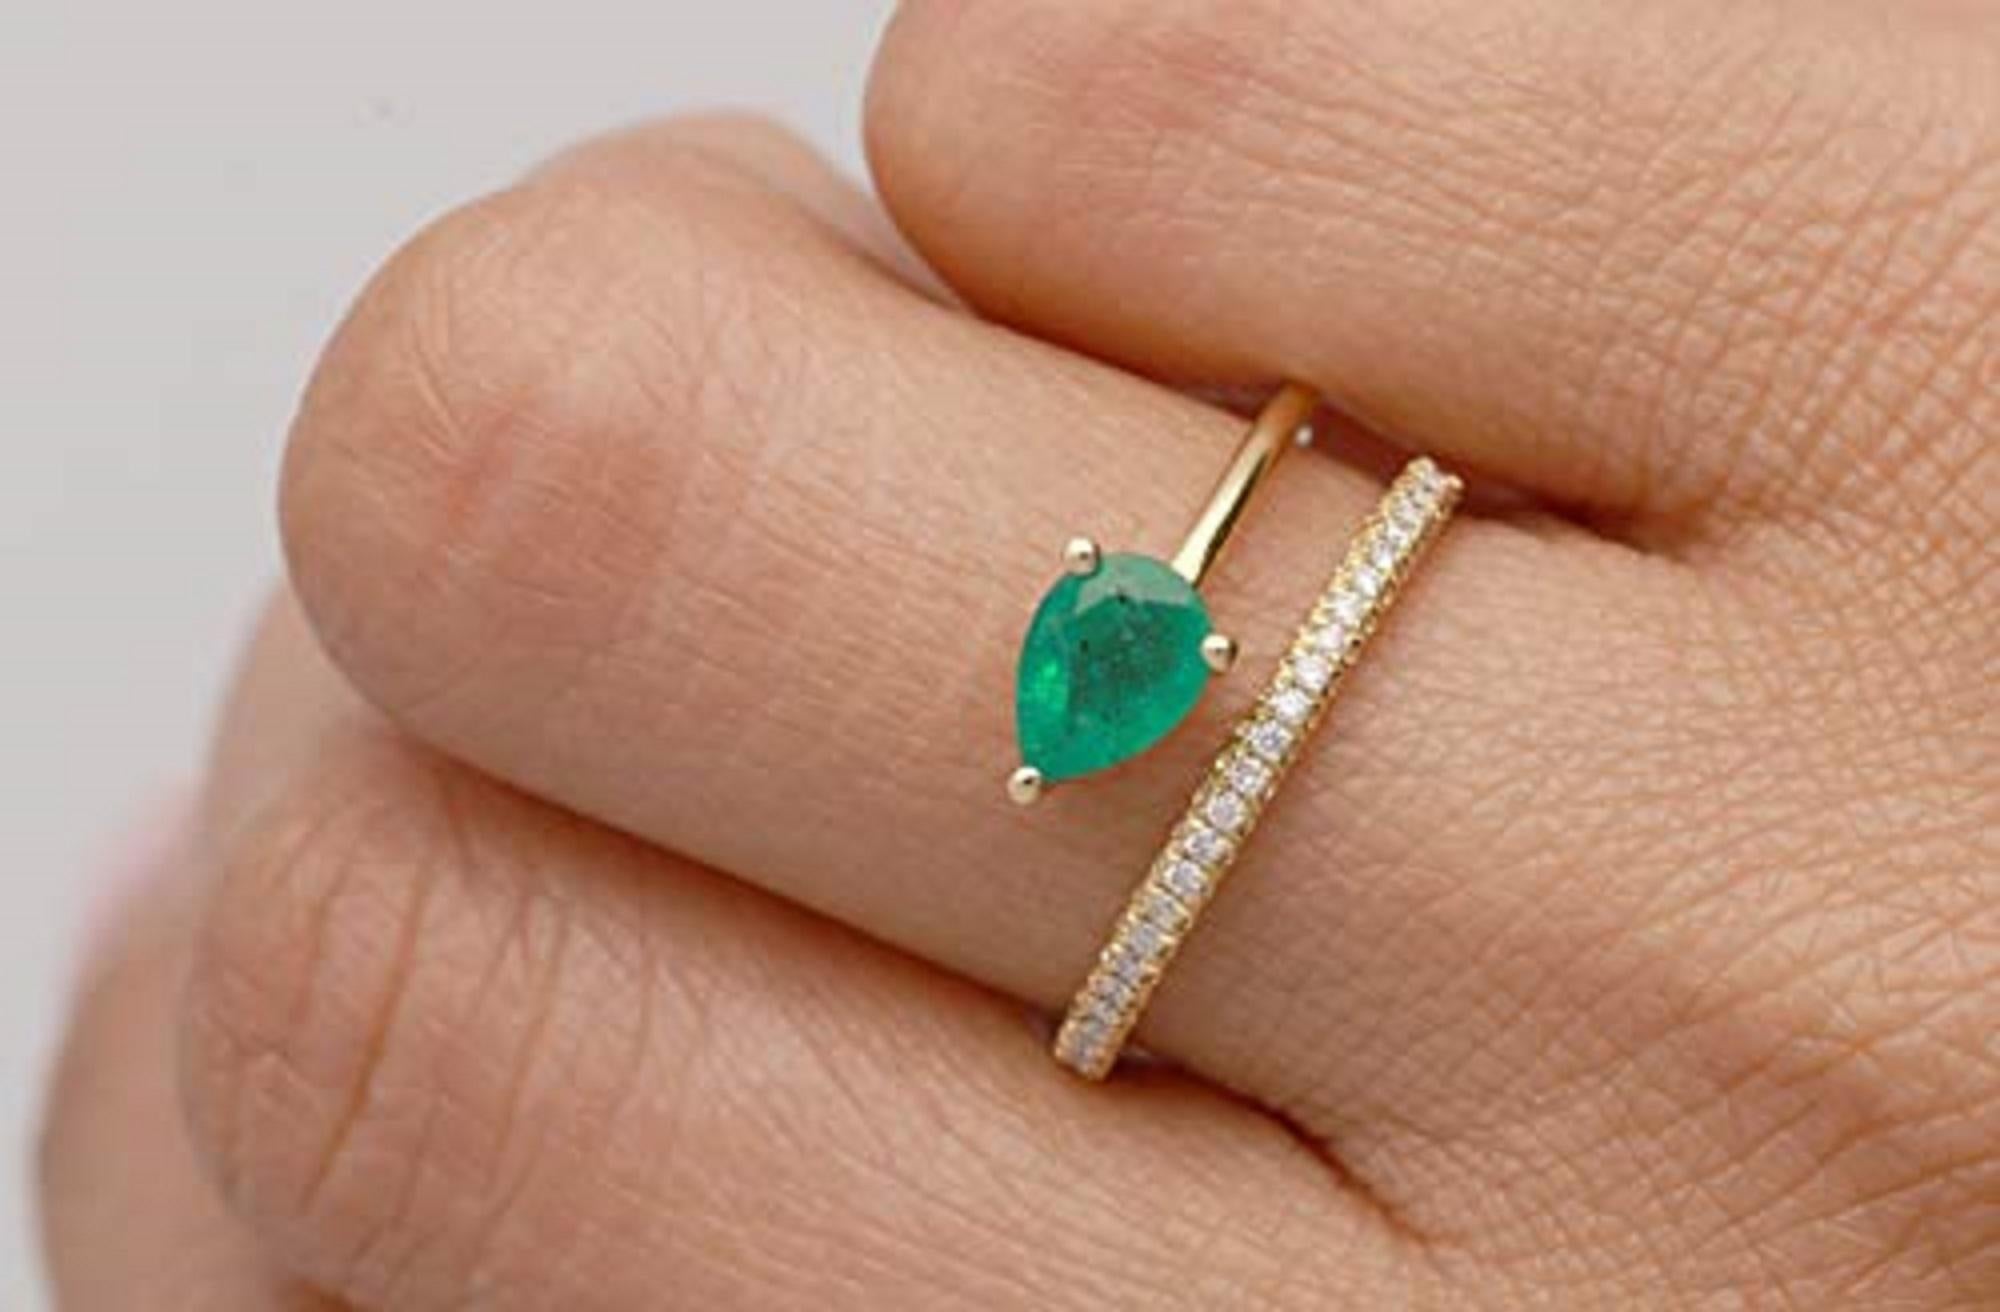 A stunning green emerald is balanced perfectly in the center of this ring, with the glossy band moving above and below. The jewelry has sparkling white diamonds along one side and the 18k yellow gold offers the ideal color contrast to such an